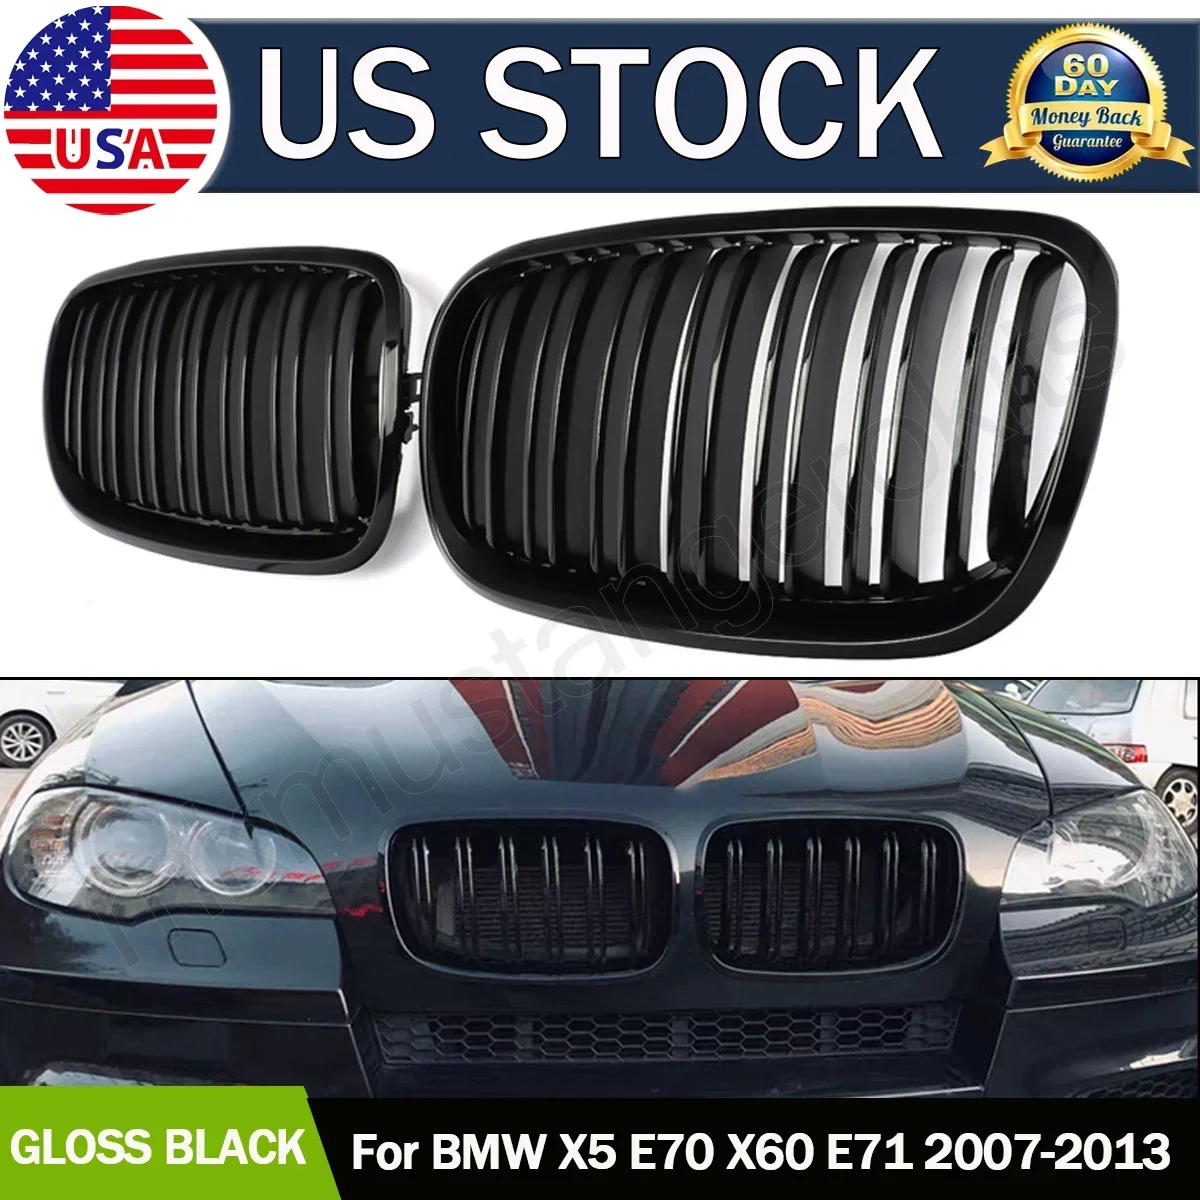 

For BMW E70 E71 X5 X6 2007-13 Pair Car Front Hood Grill Kidney Grilles Racing Grill Auto Accessories Gloss Black Dual Slats